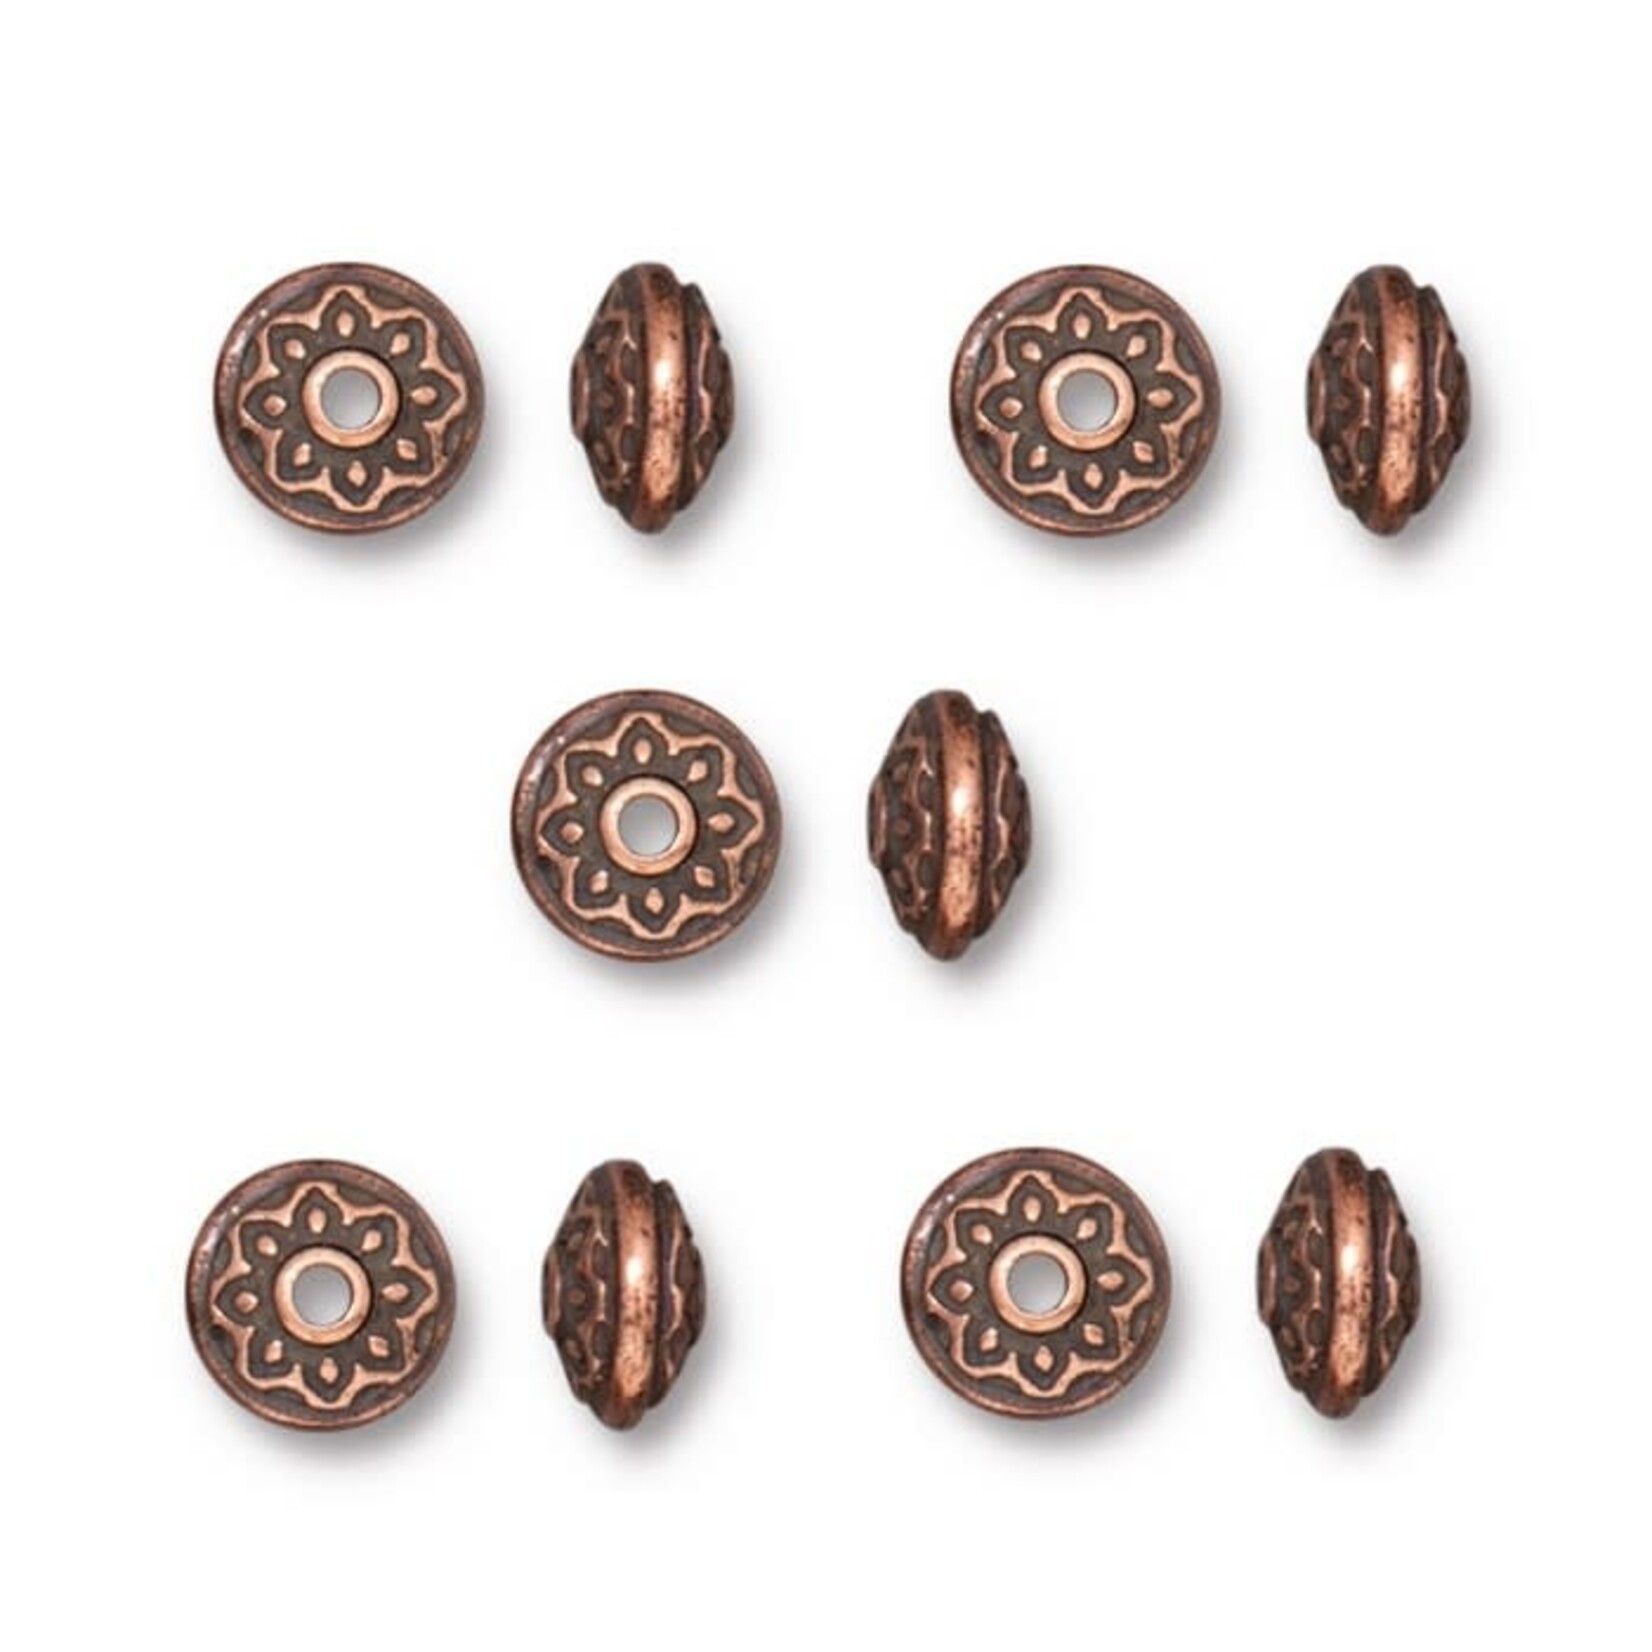 Lotus Spacer Bead Antique Copper Plated - 10 Pieces